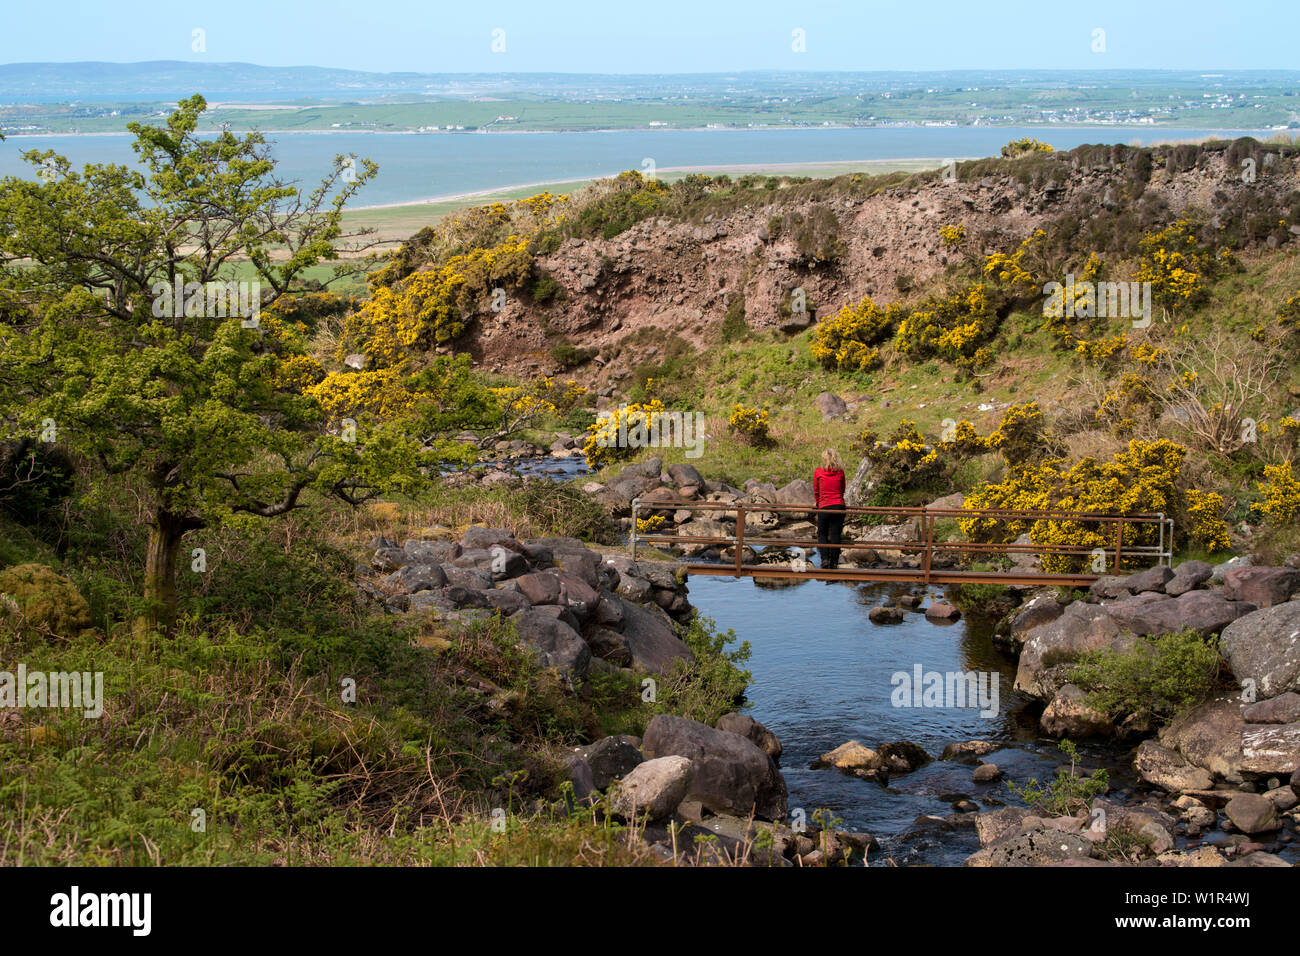 A young woman with blond curls in a red jacket stands on a small bridge that crosses a creek which flows into the Atlantic Ocean at Tralee Bay on the Stock Photo